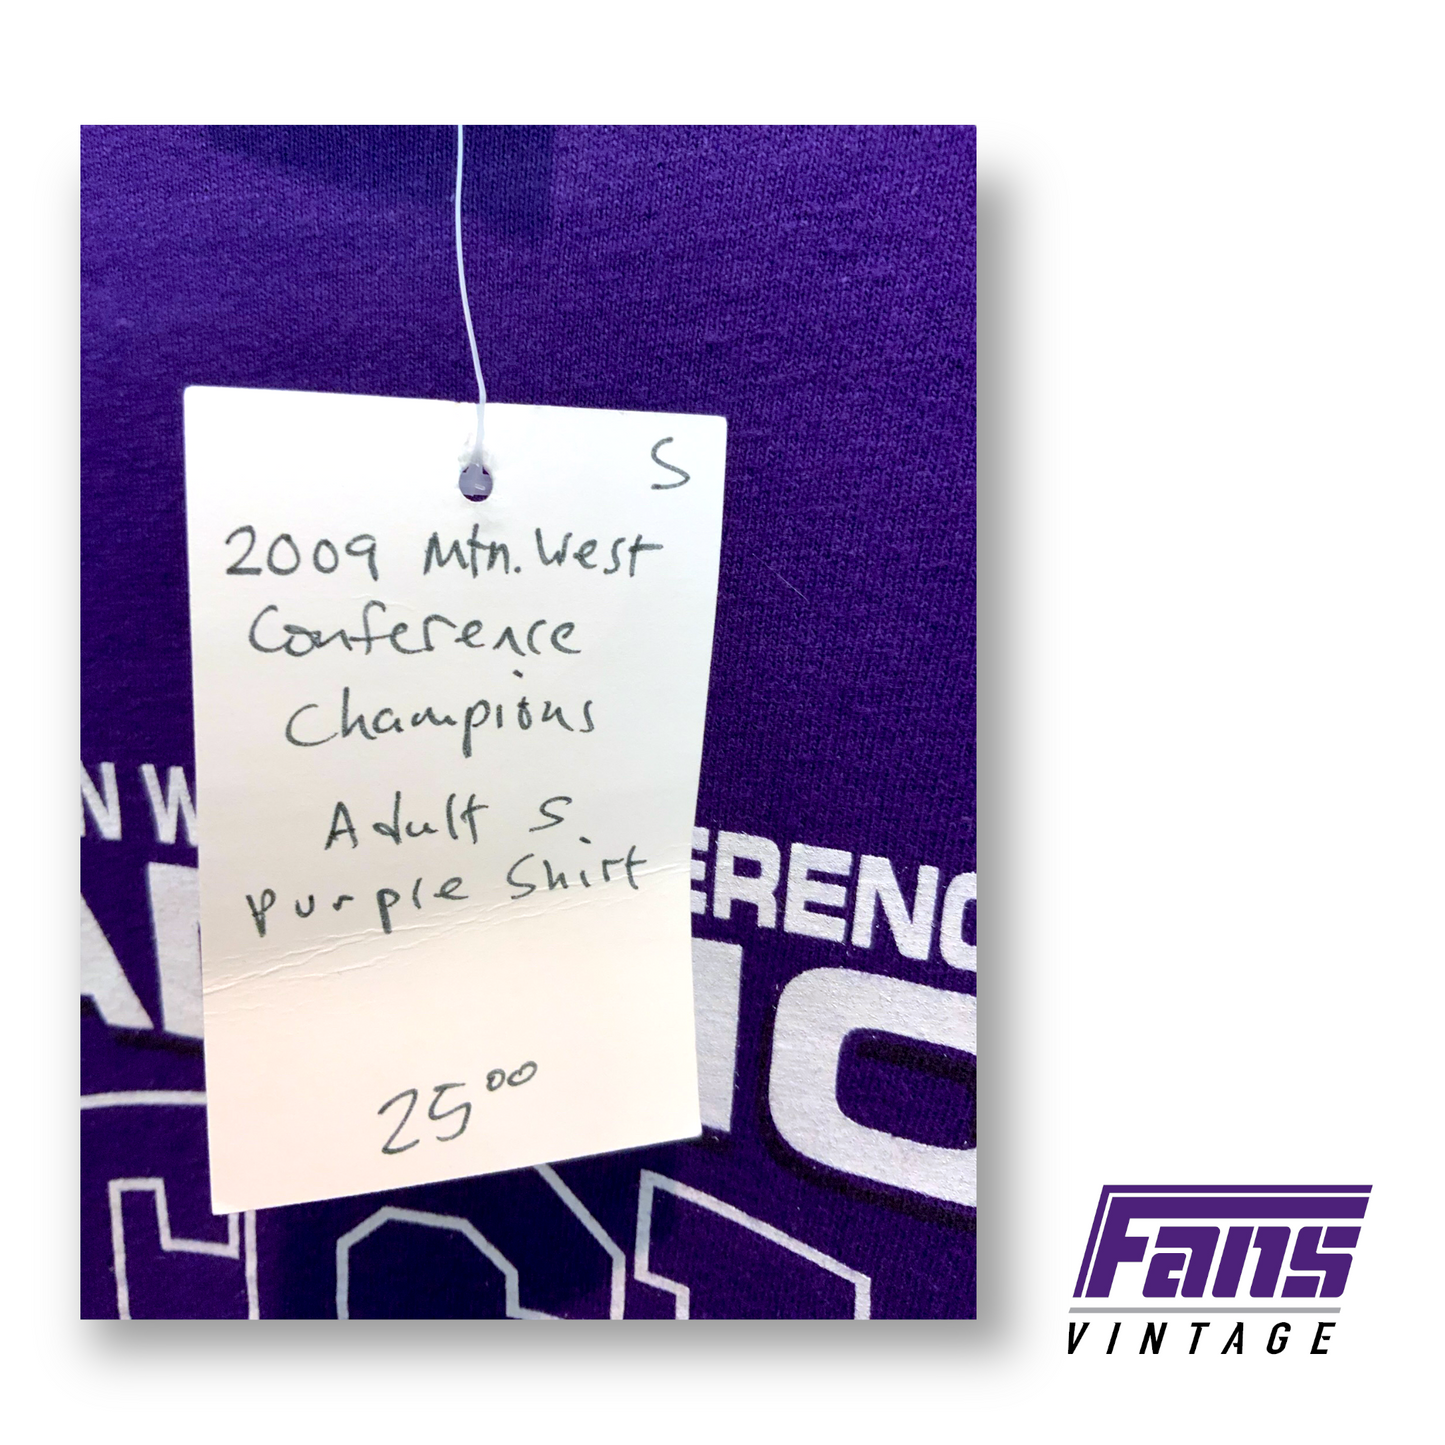 Vintage TCU Football Shirt - 2009 Mountain West Conference Champions Tee